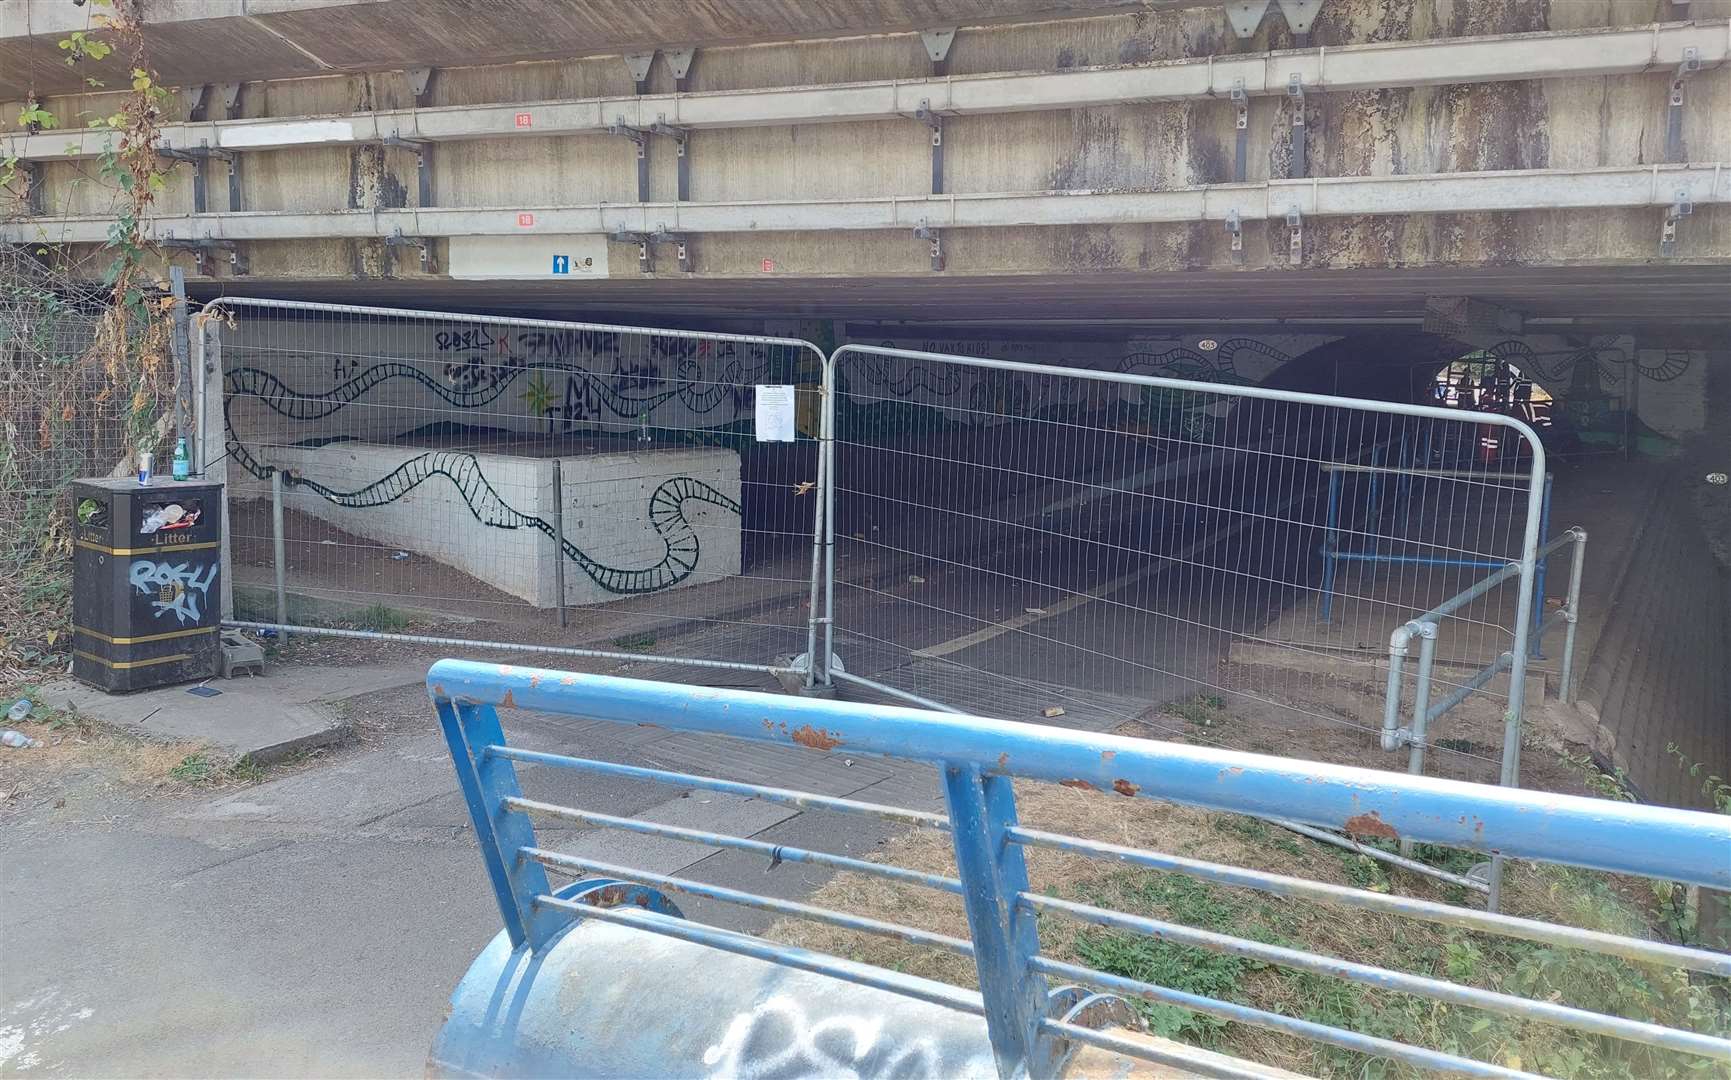 The underpass is blocked off between the station and Designer Outlet